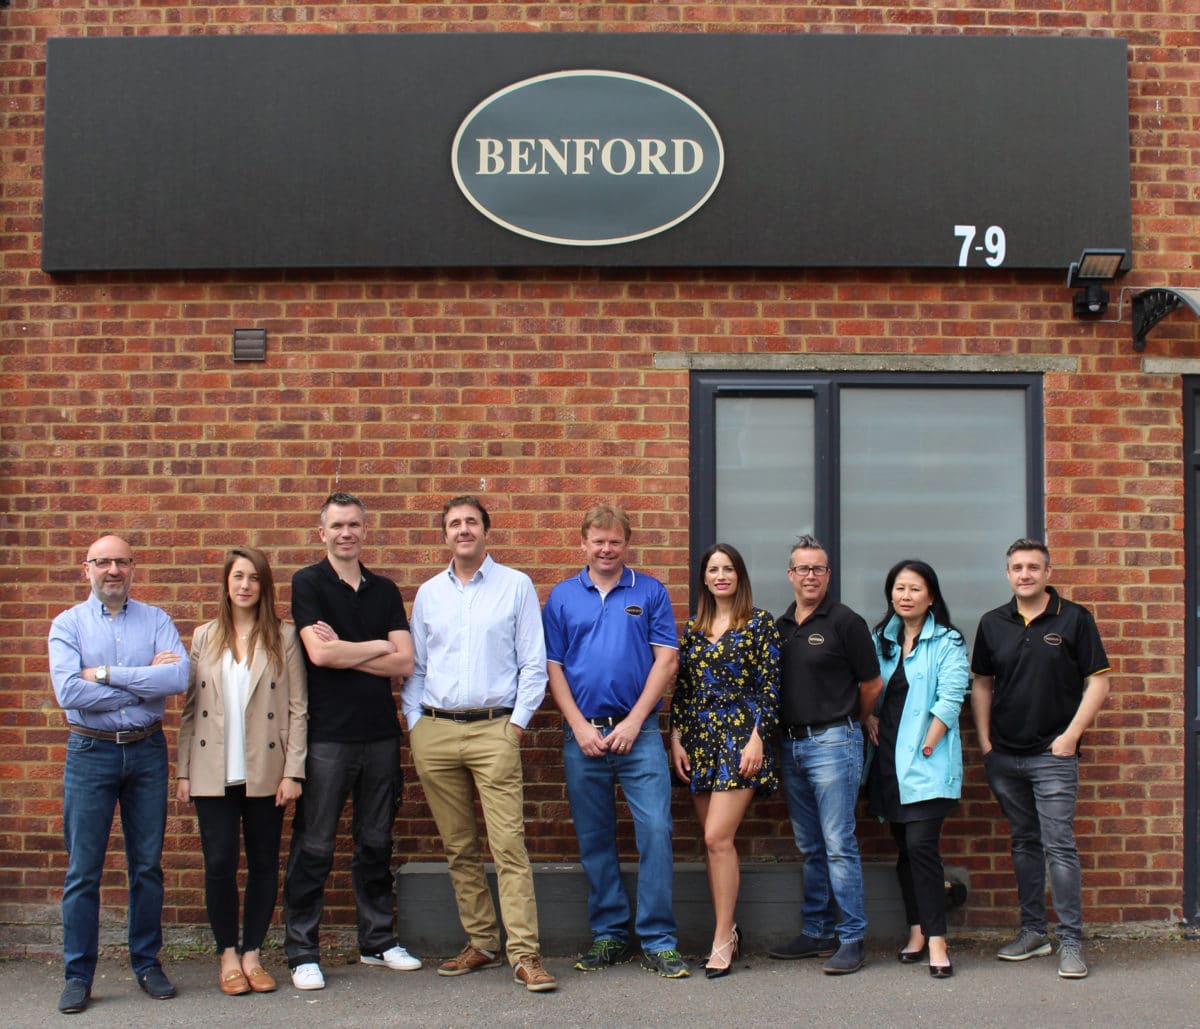 The Benford UV Team outside the head office in the UK